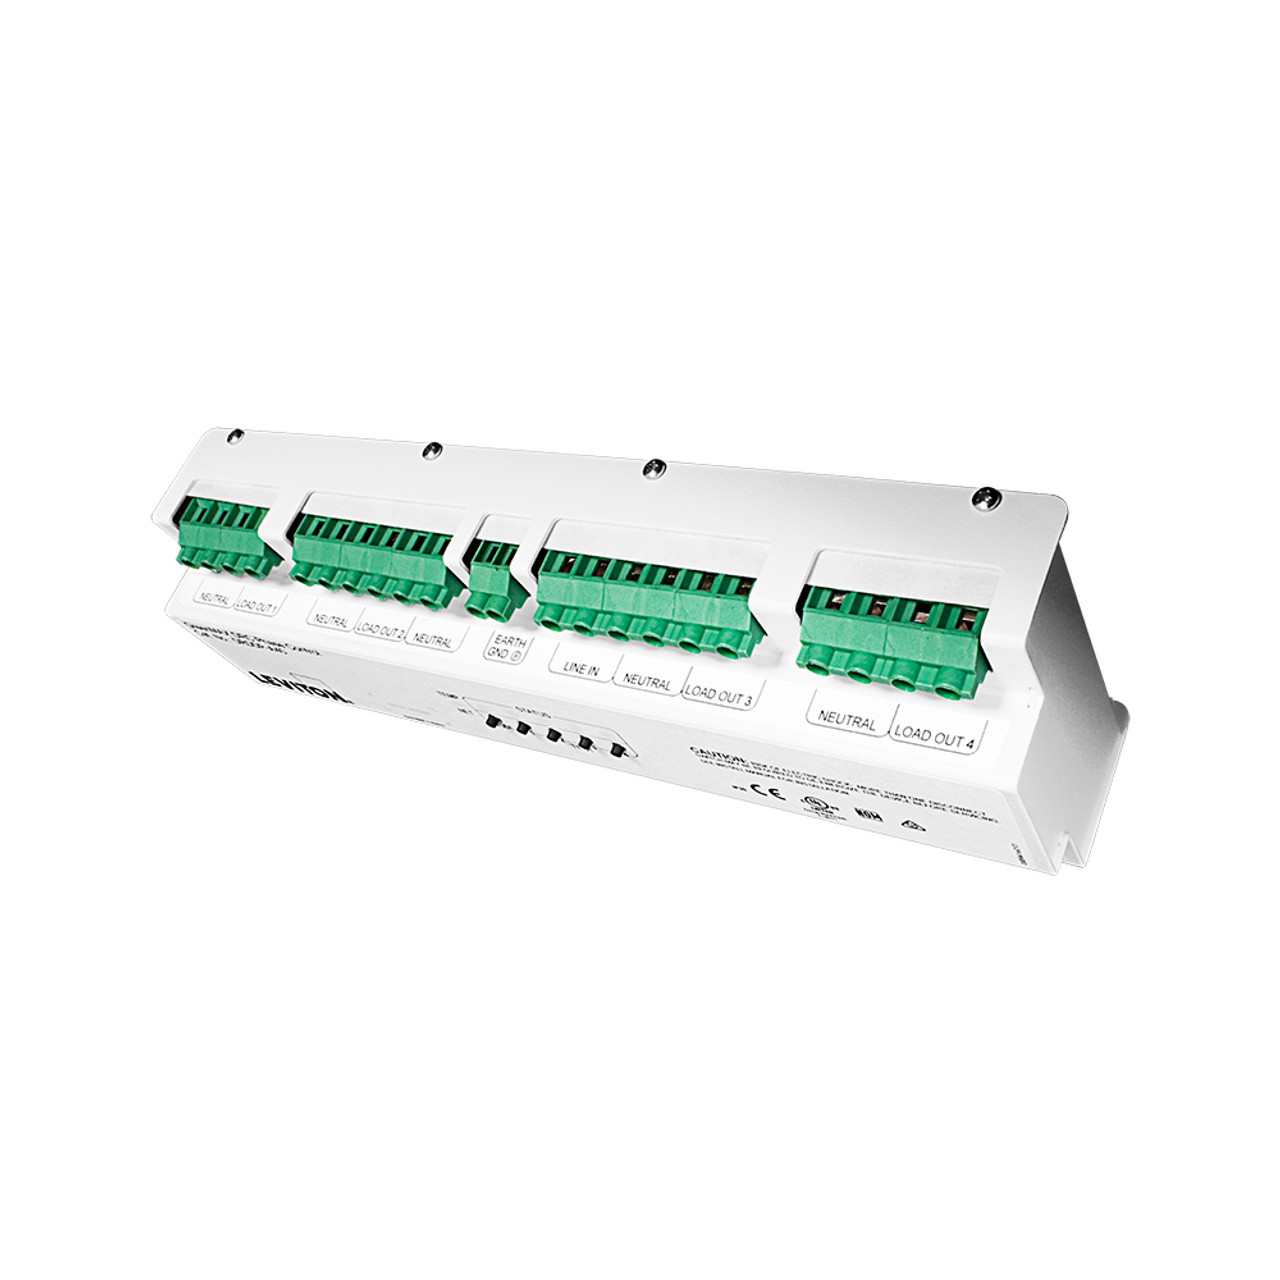 Leviton DRDDP-A40 GreenMAX DRC, Dimmer, 4 Channel, LED Controller, 2.5 Amps per Channel, 120-277VAC 